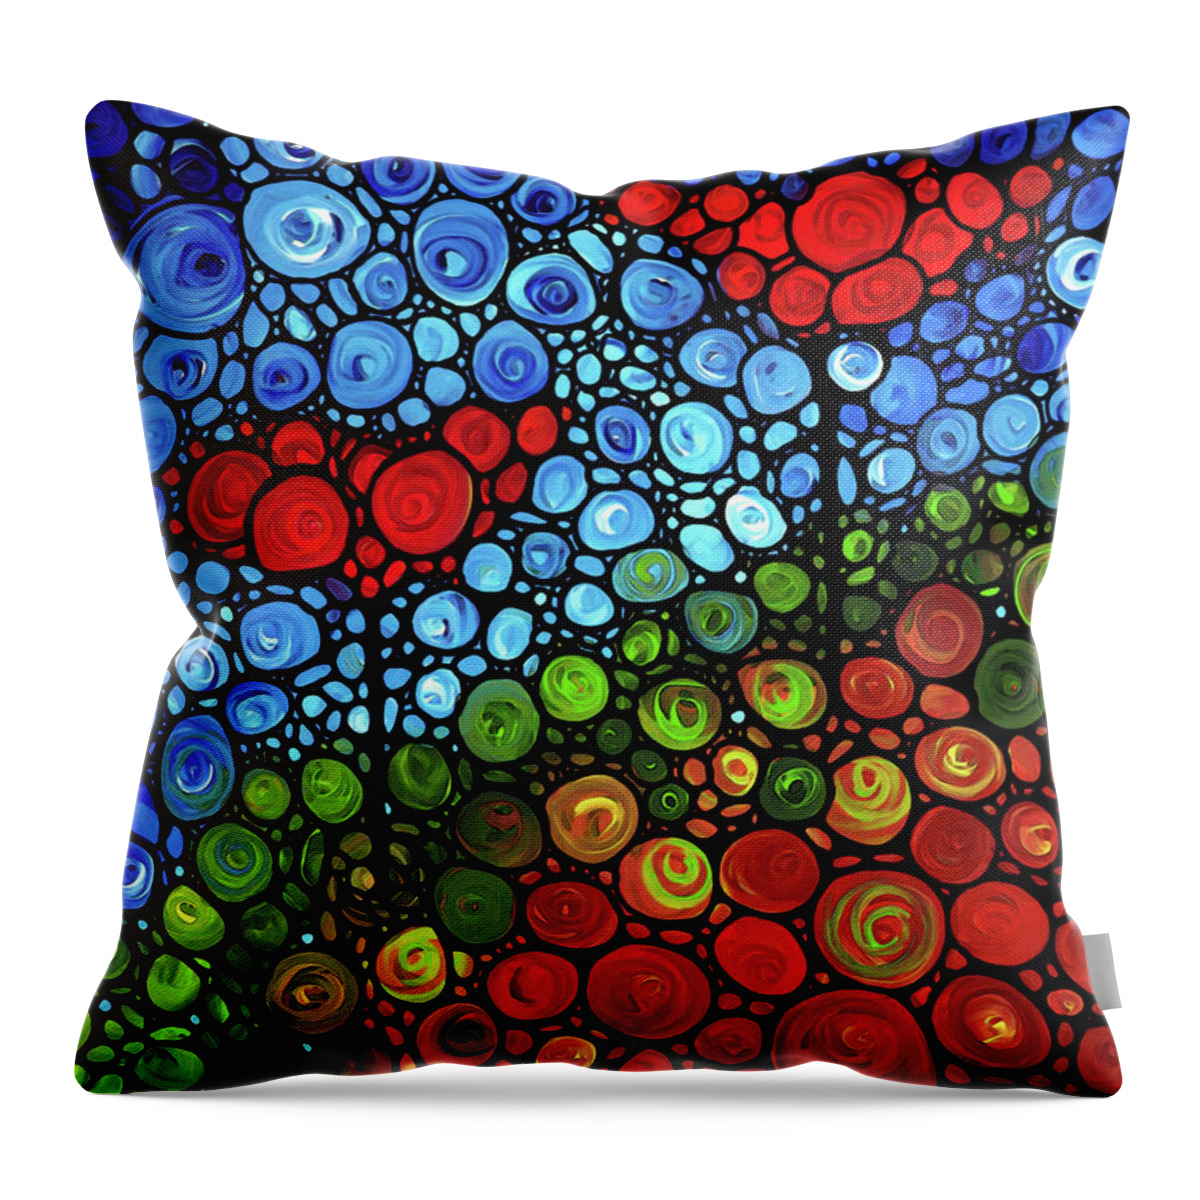 Floral Throw Pillow featuring the painting The Roots Of Love Run Deep by Sharon Cummings